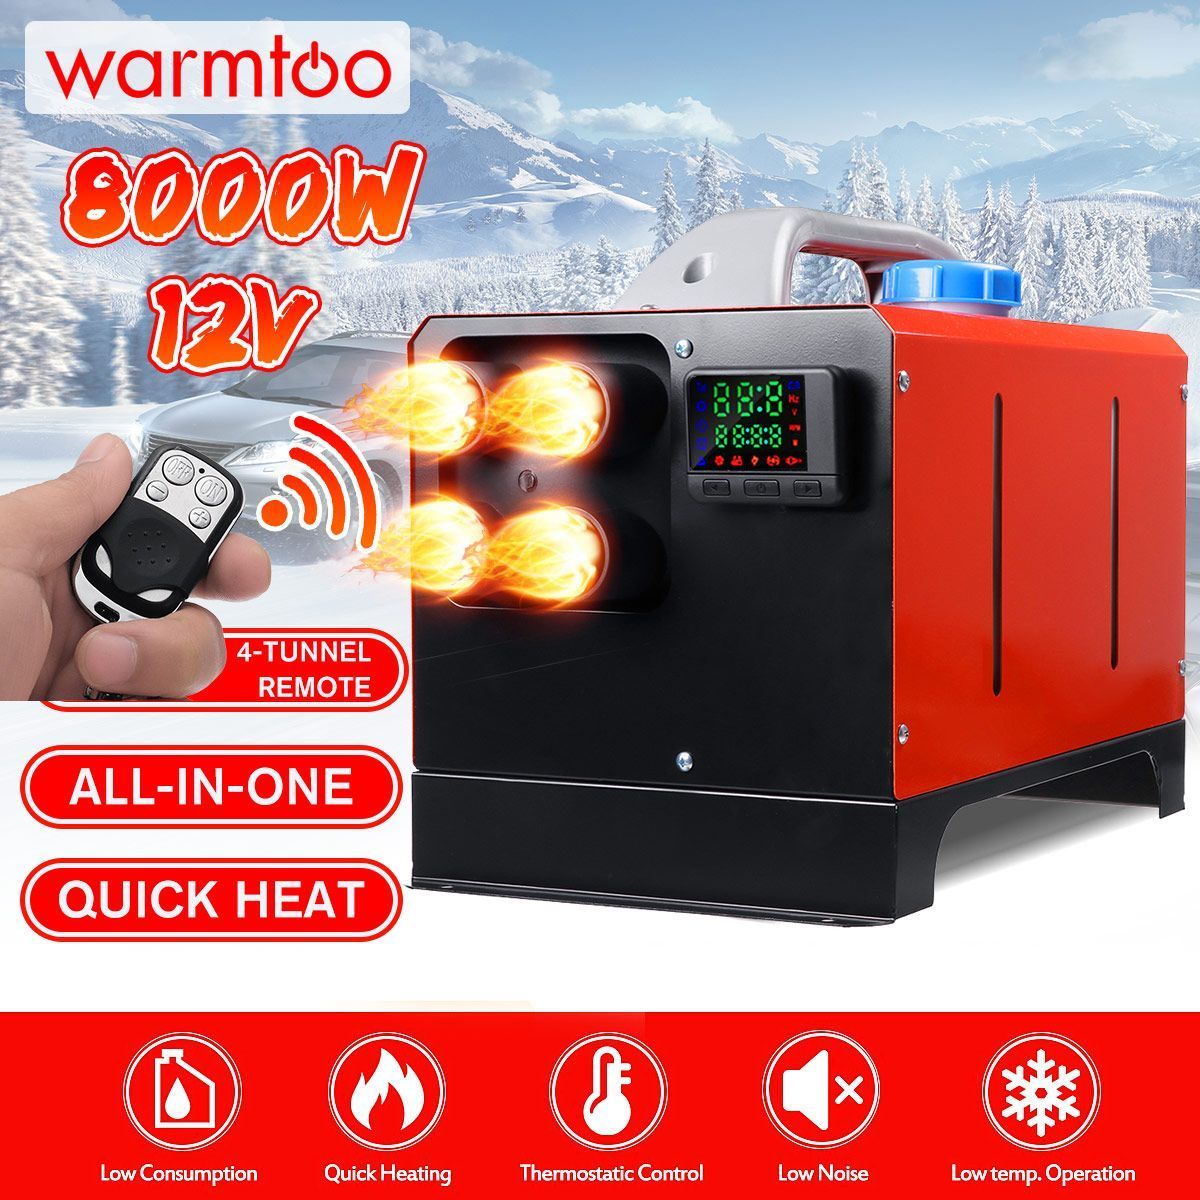 Warmtoo-All-In-One-12V-8KW-Diesel-Air-Heater-Car-Parking-Heater-Wireless-Remote-Control-LCD-Display-1754108